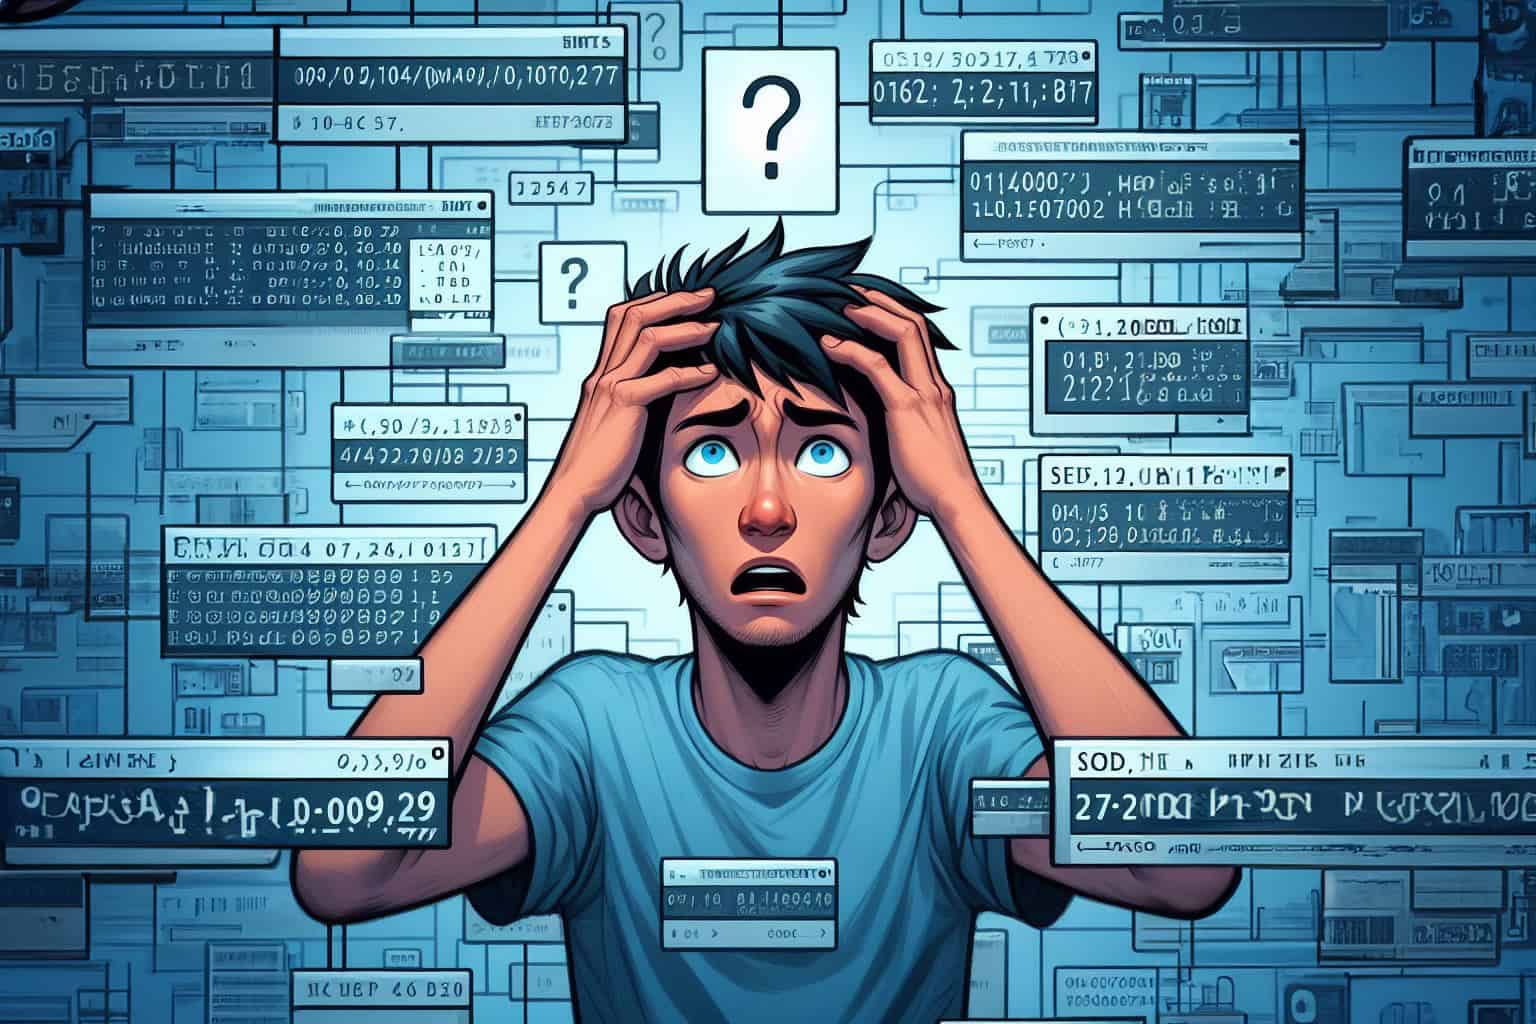 A young developer with a big question mark above their head, surrounded by random times and dates.